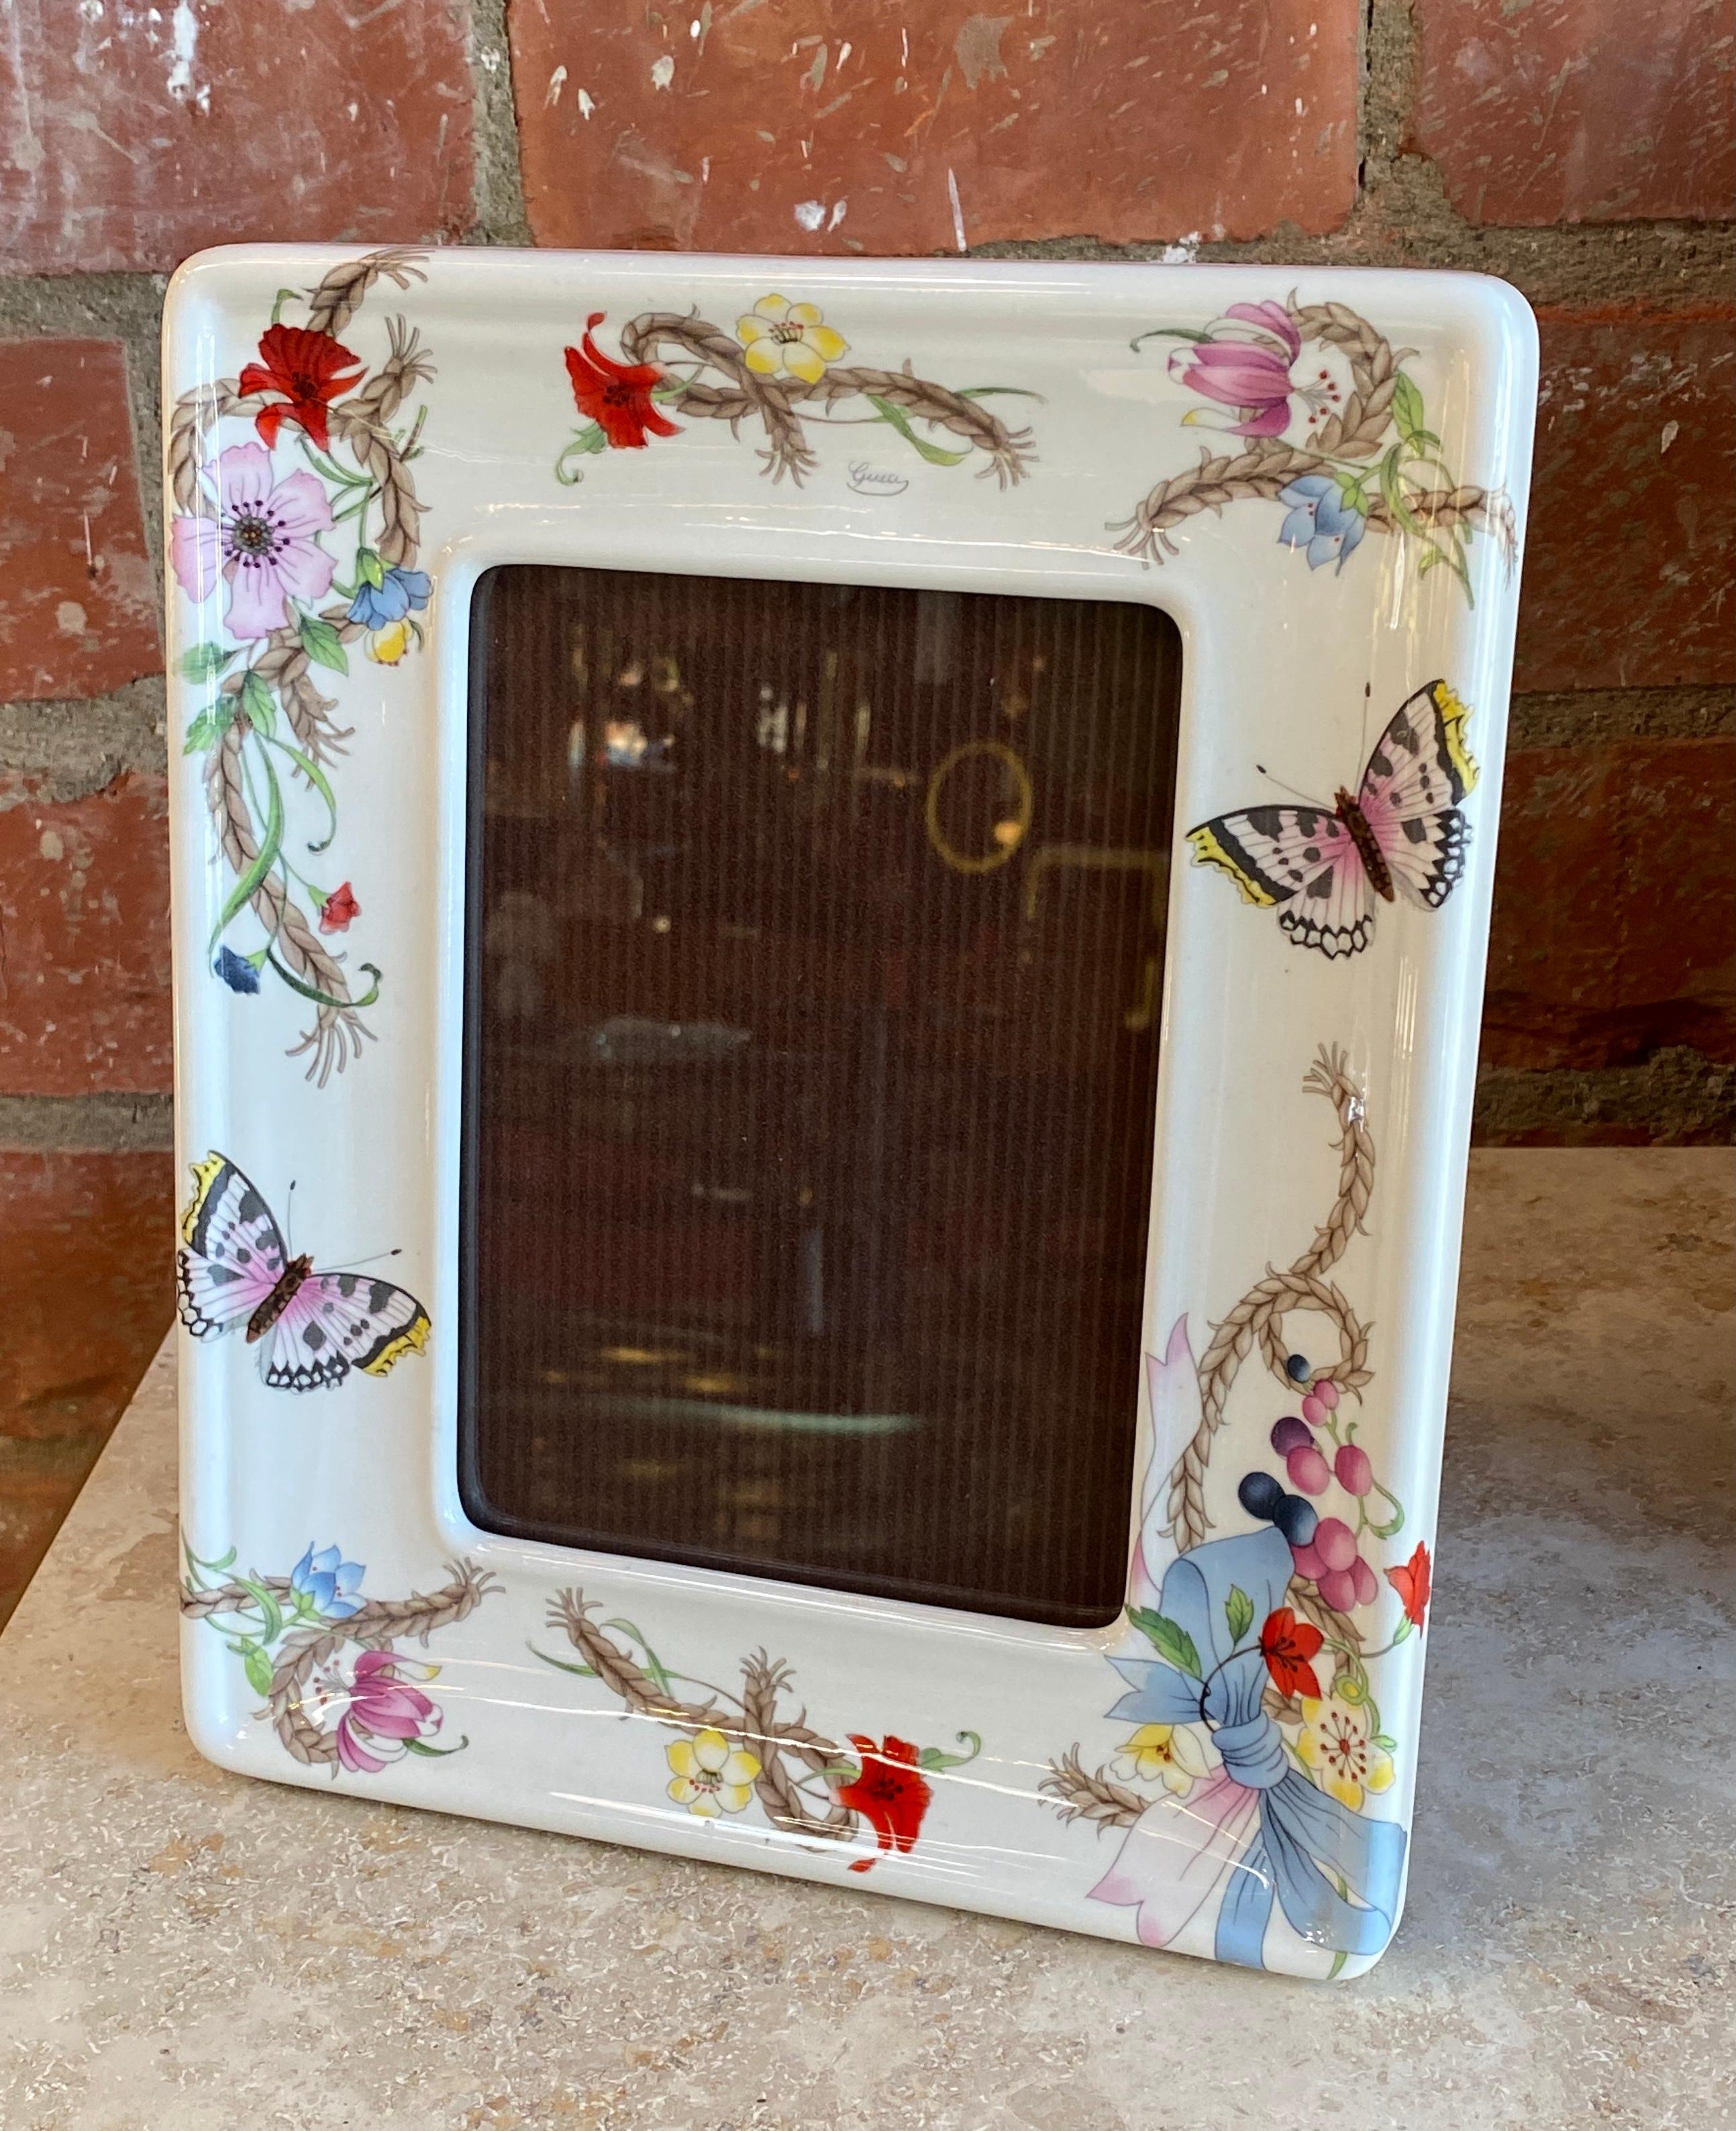 Gucci Ceramic Frame Painted with Floral Designs, Signed 1